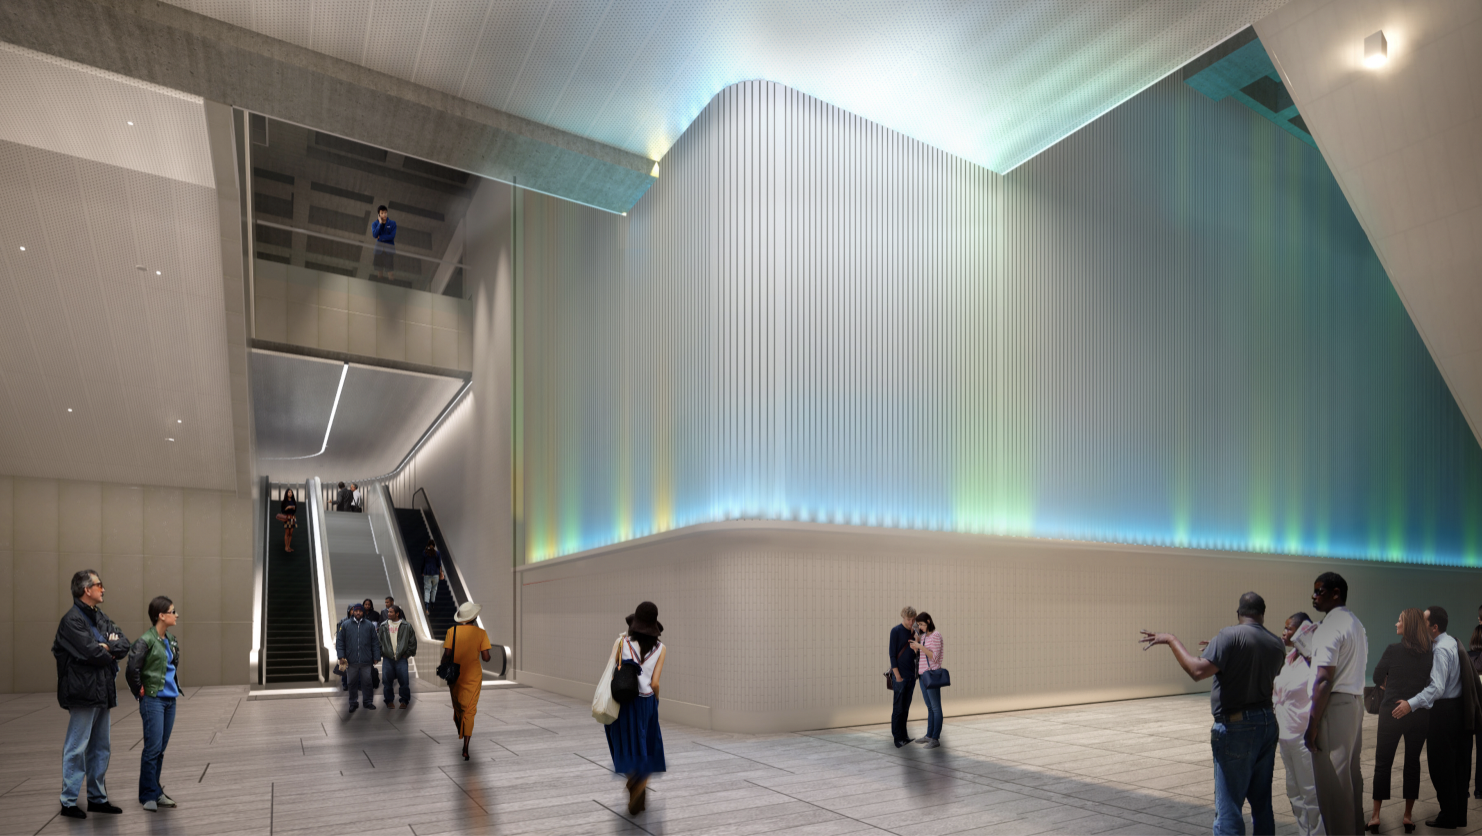 A rendering of a refurbished MARTA station with blue and white light installations